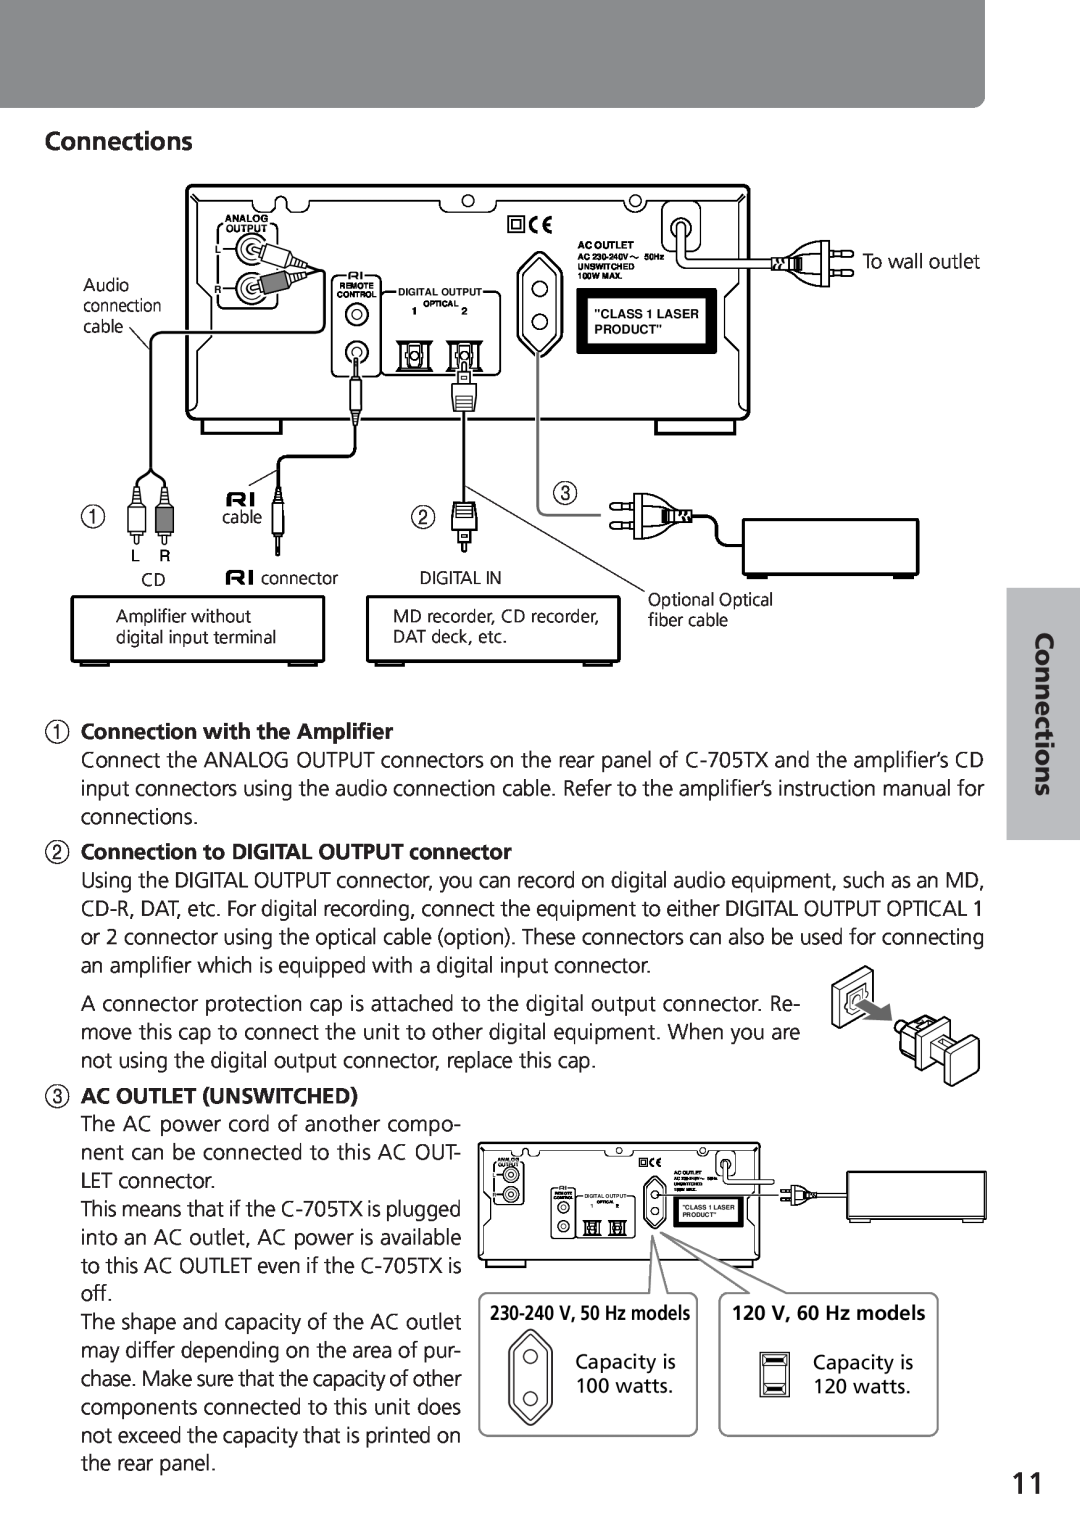 Onkyo C-705TX Operations, Other Information, 1Connection with the Amplifier, 2Connection to DIGITAL OUTPUT connector 